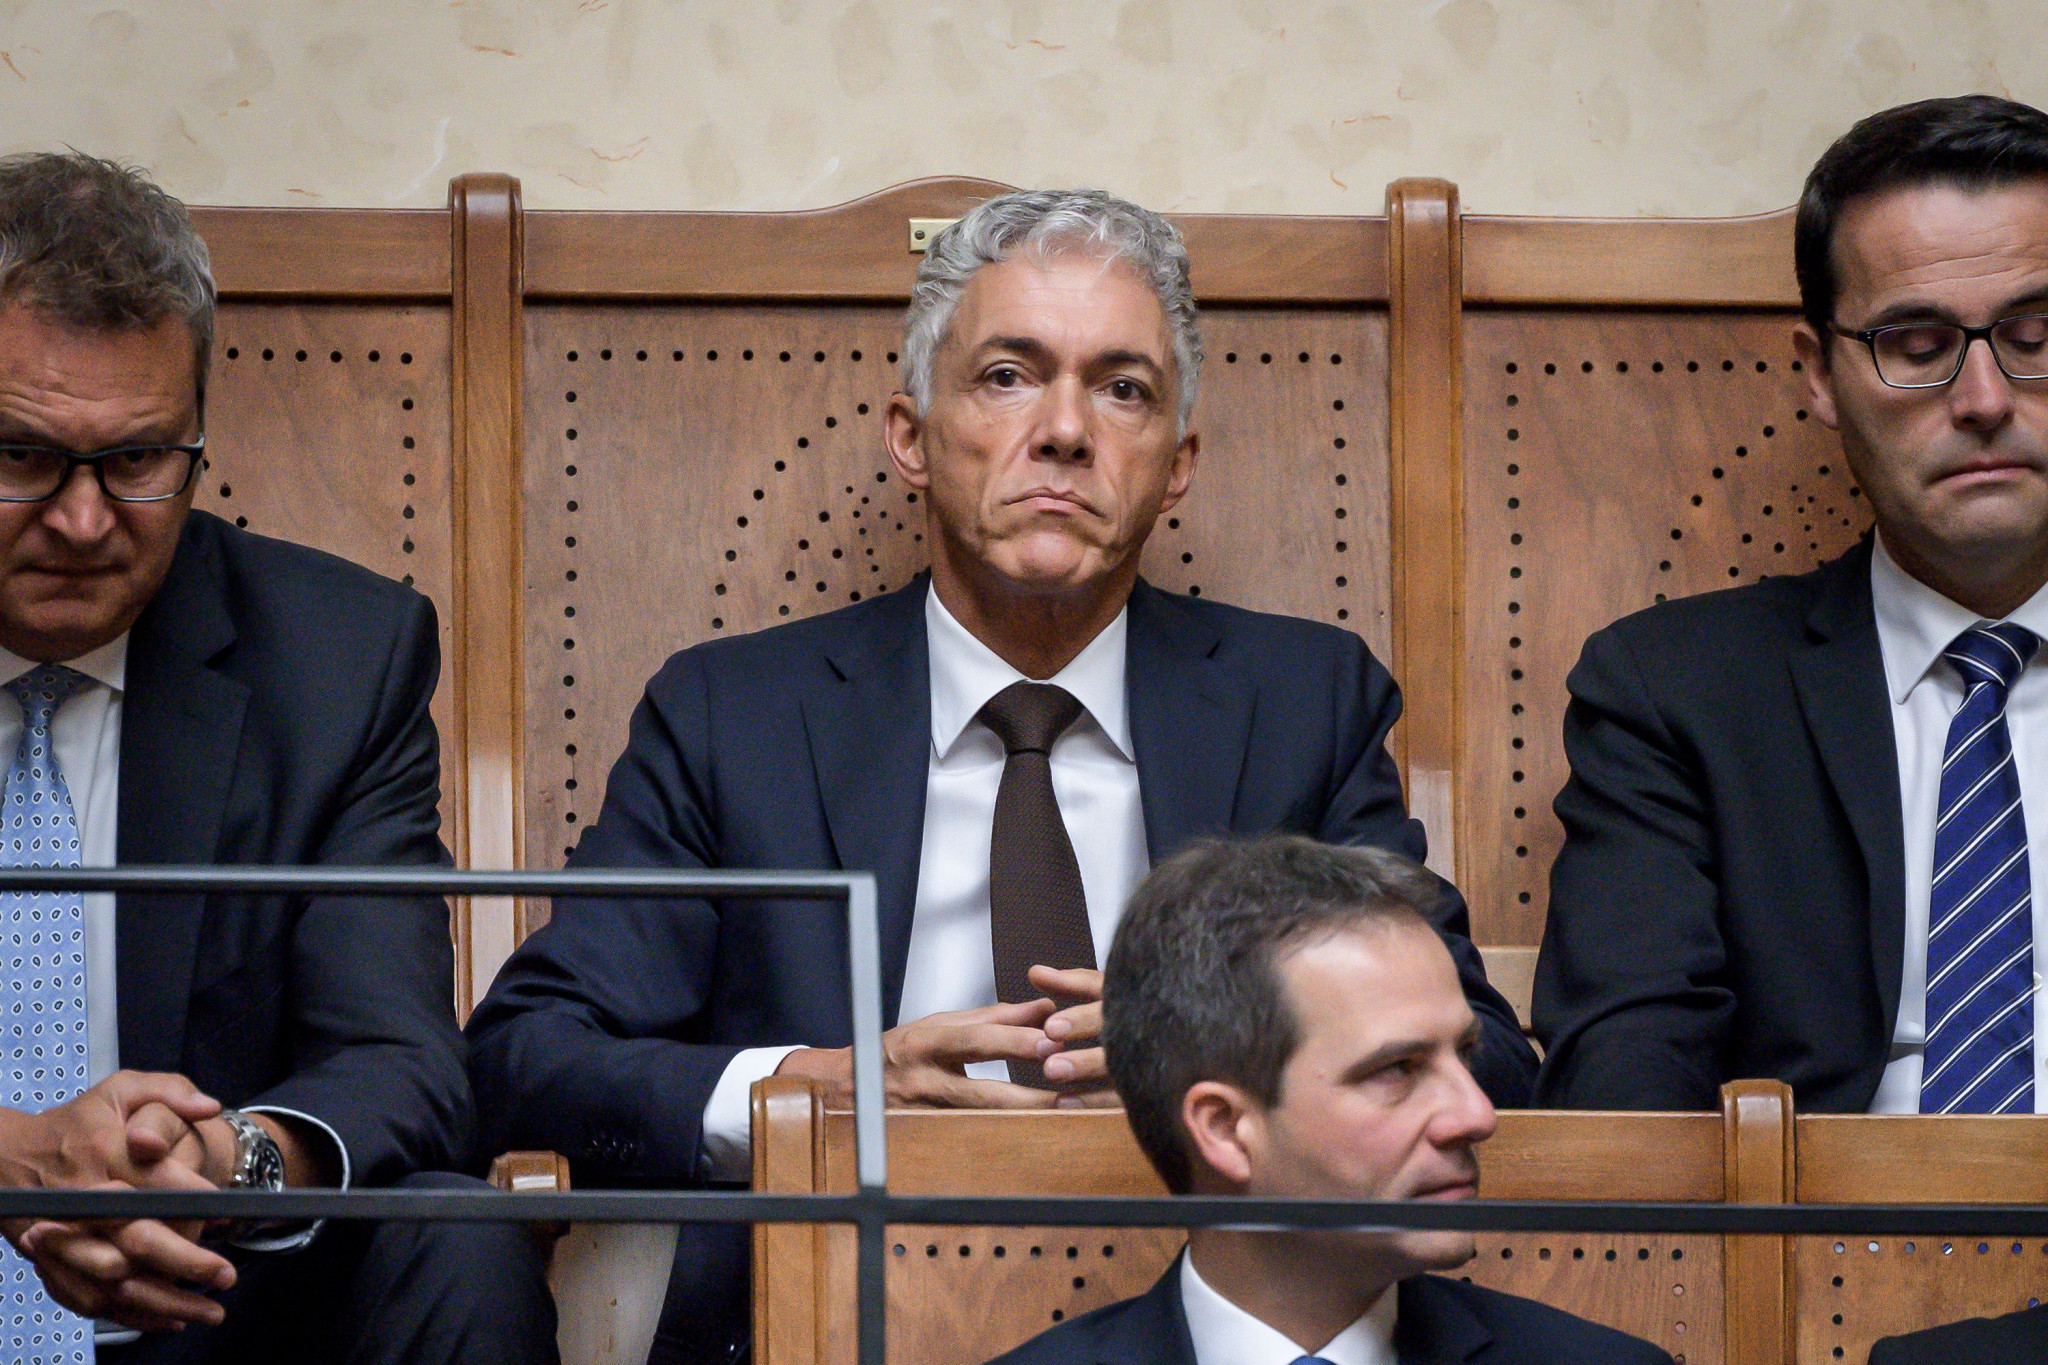 If Michael Lauber is found to have committed a breach, the Swiss Parliament will vote on his removal ©Getty Images